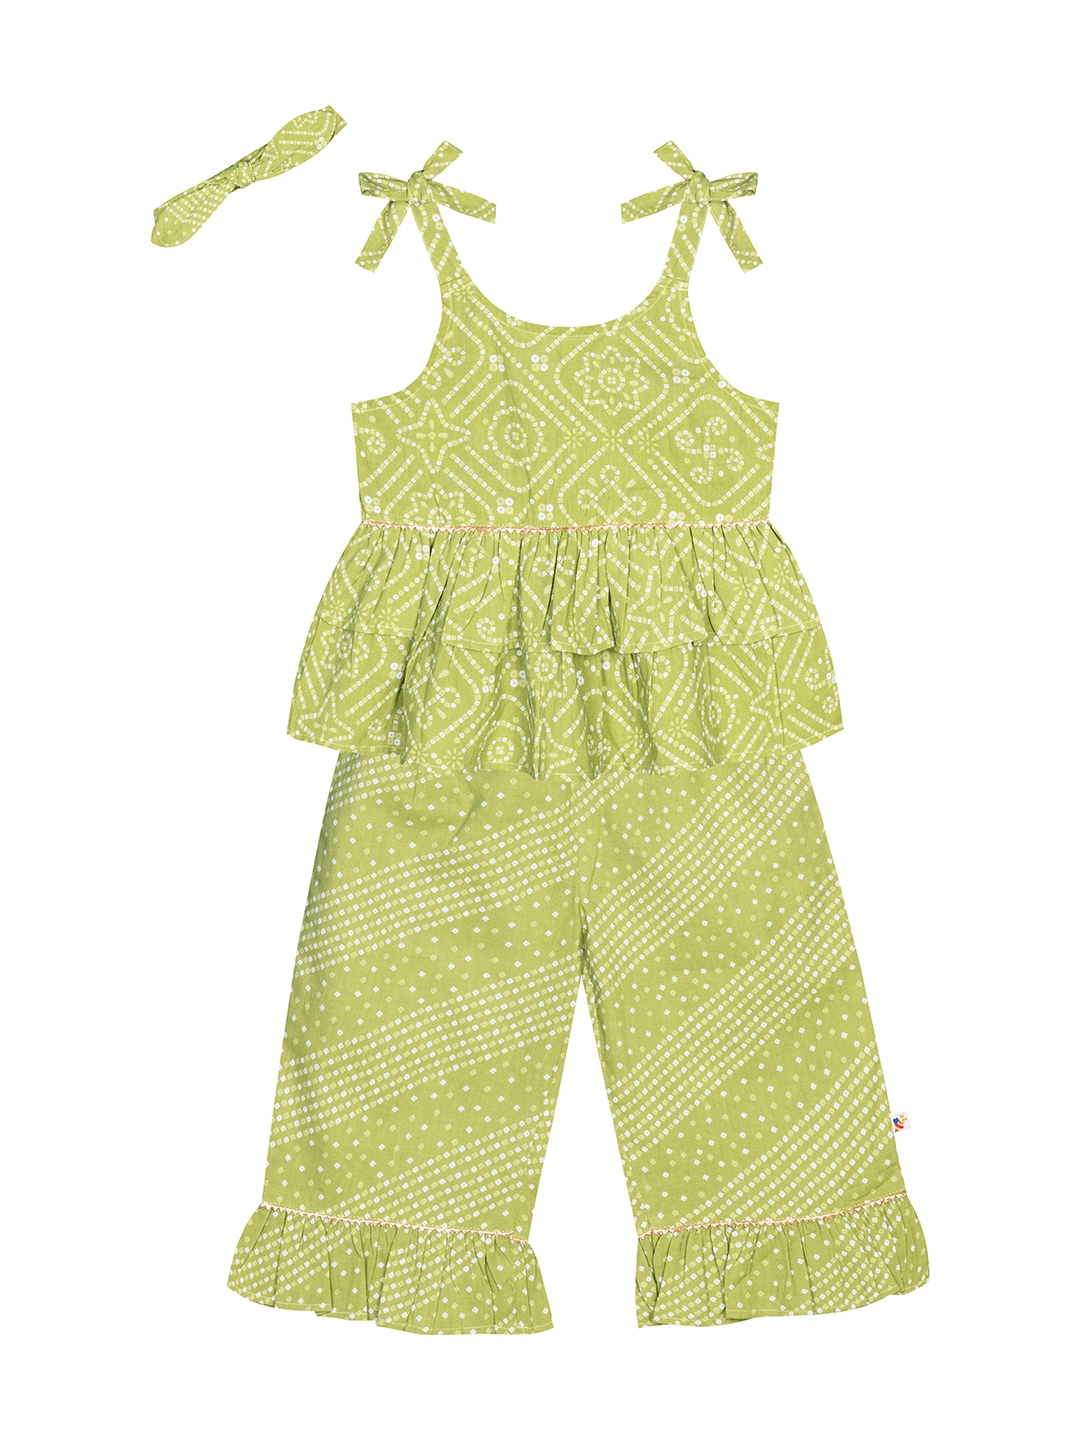 Budding Bees | Budding Bees Infants Cotton Top-Pajama Set with Matching Hairband-Green